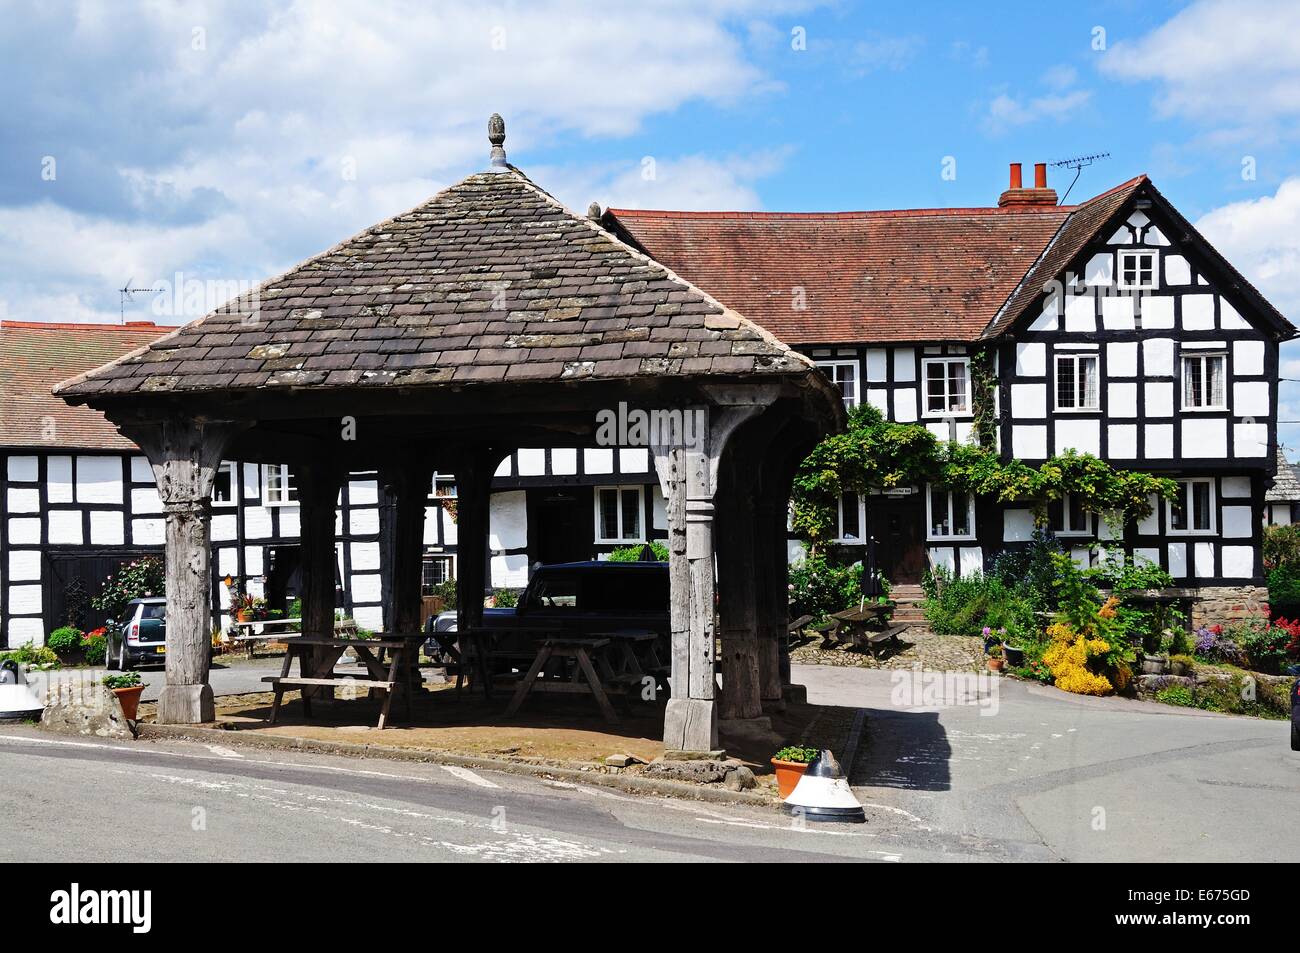 View of the New Inn Public House and Market Hall in the Market Square, Pembridge, Herefordshire, England, UK, Western Europe Stock Photo